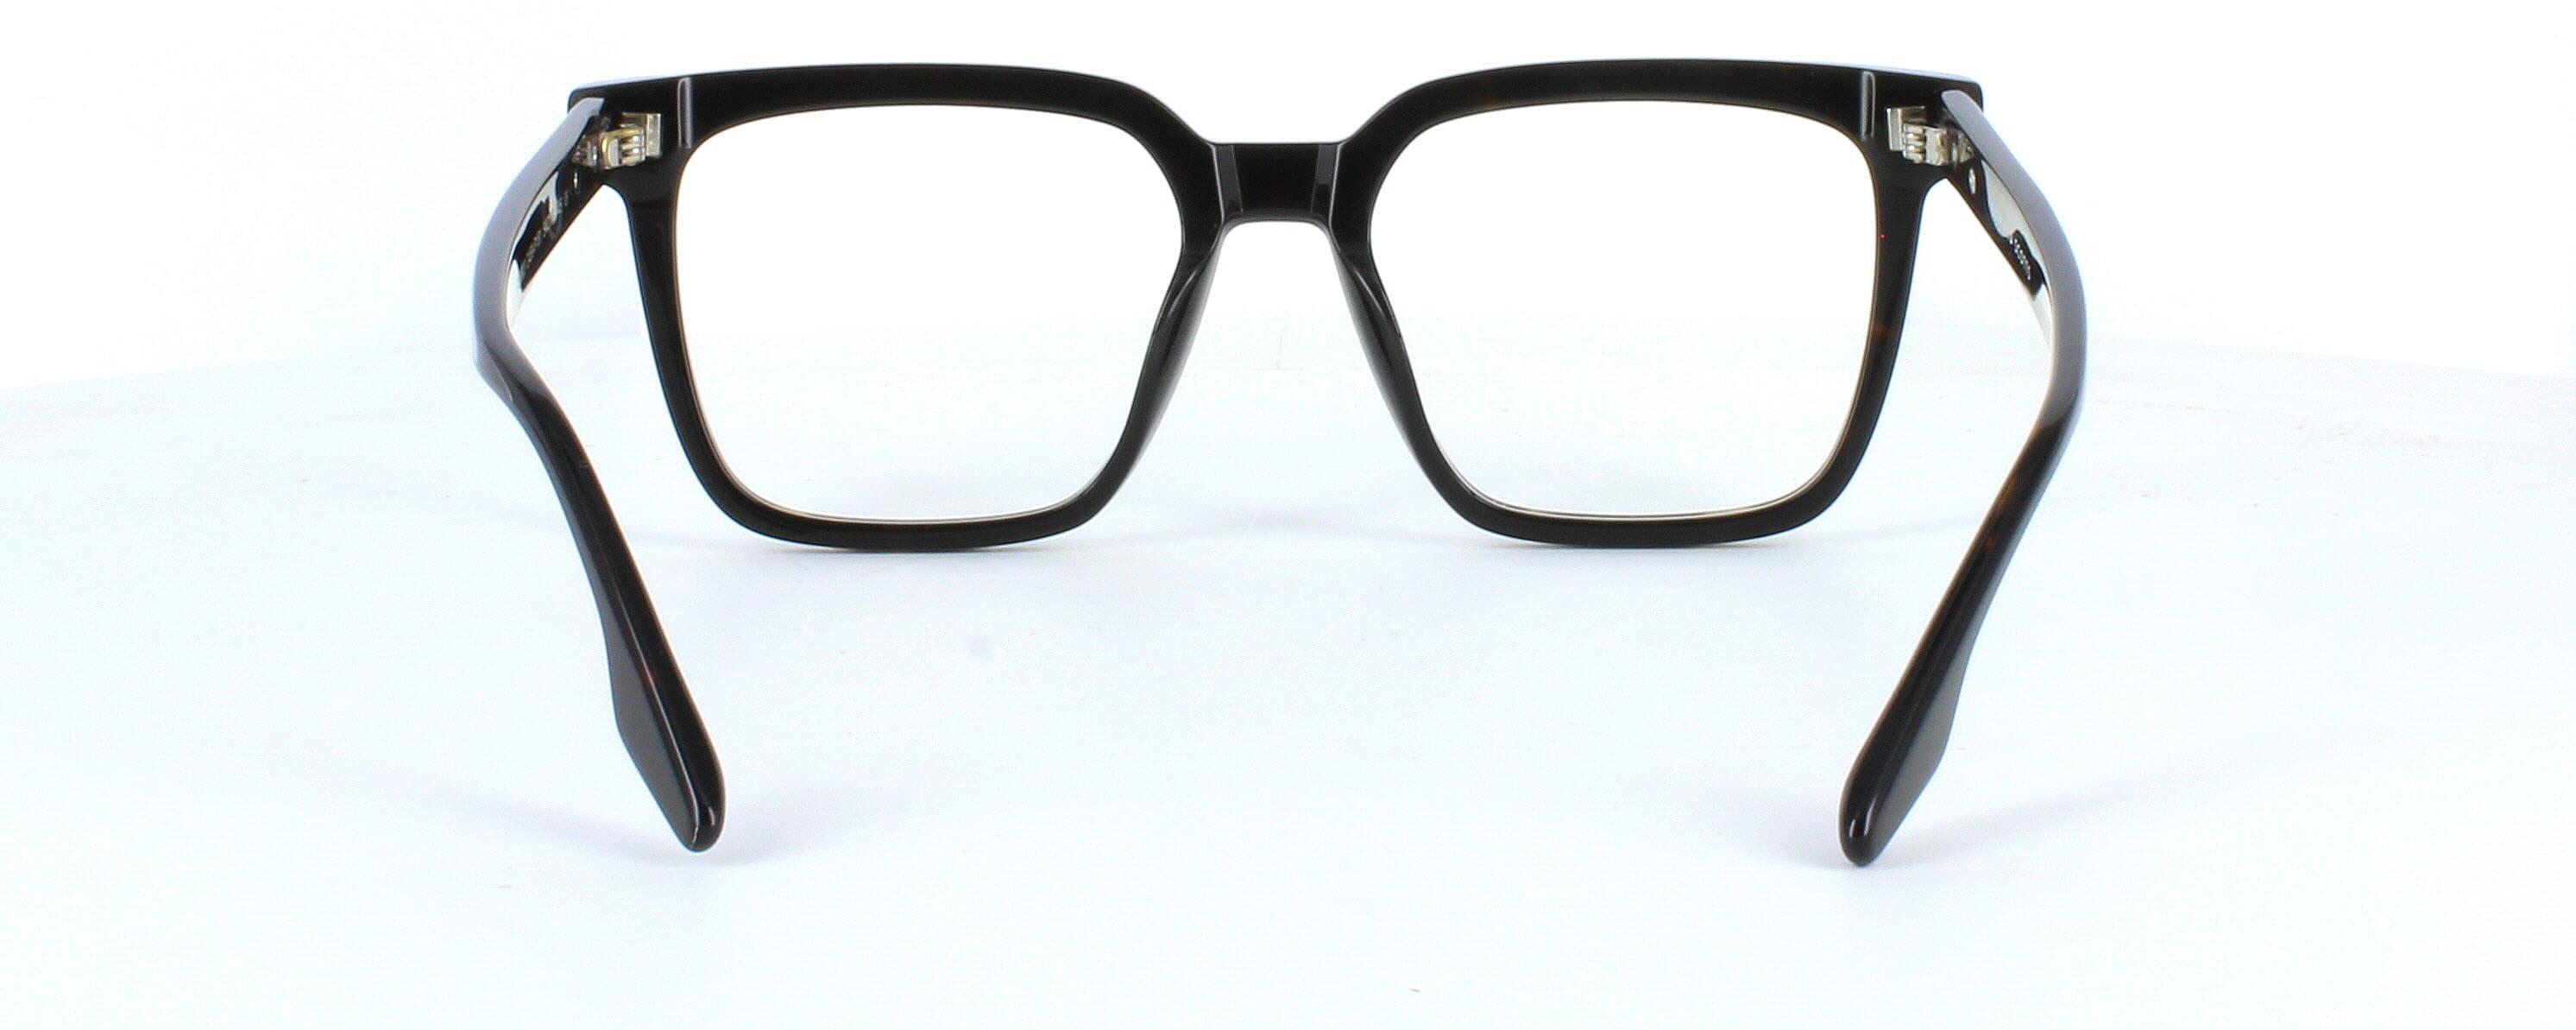 Edward Scotts PS8803 - Brown - Gent's bold statement acetate frame with square shaped lenses - image view 4